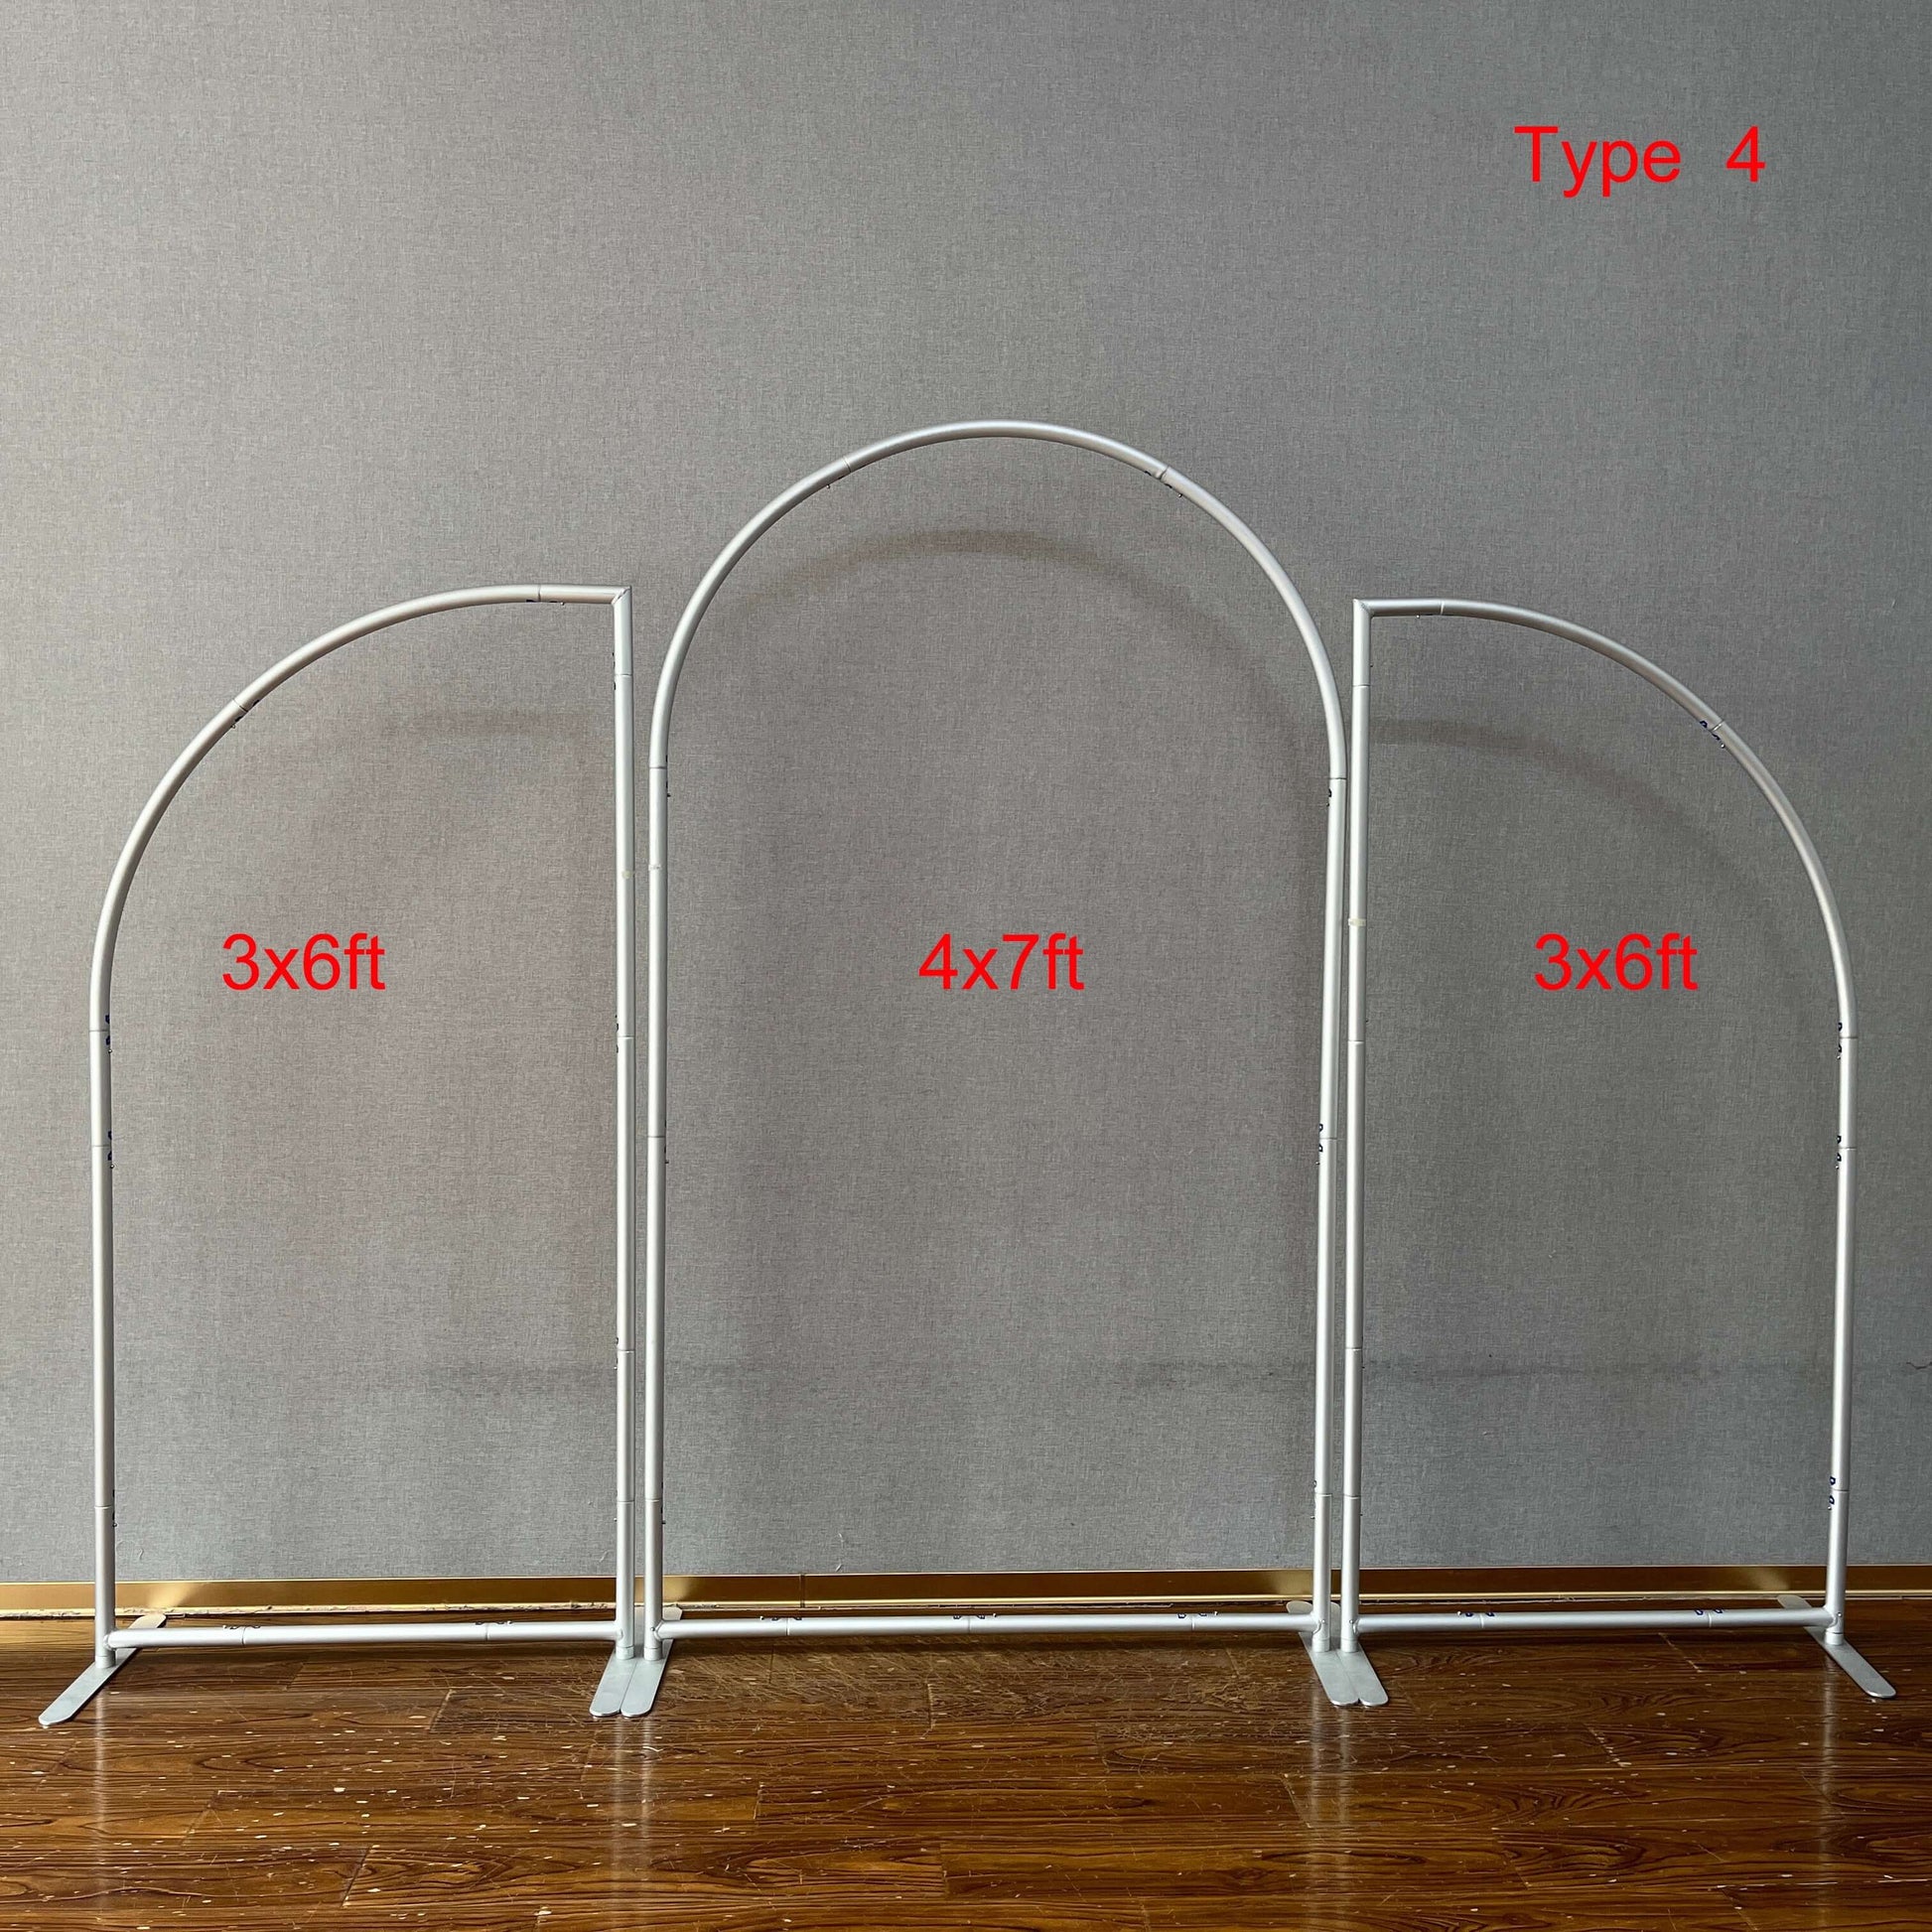 Chiara Arch Stand Frames 5X7Ft Open 3X4Ft 4X7Ft 3X6Ft+4X7Ft+3X6Ft Stands Party Backdrop